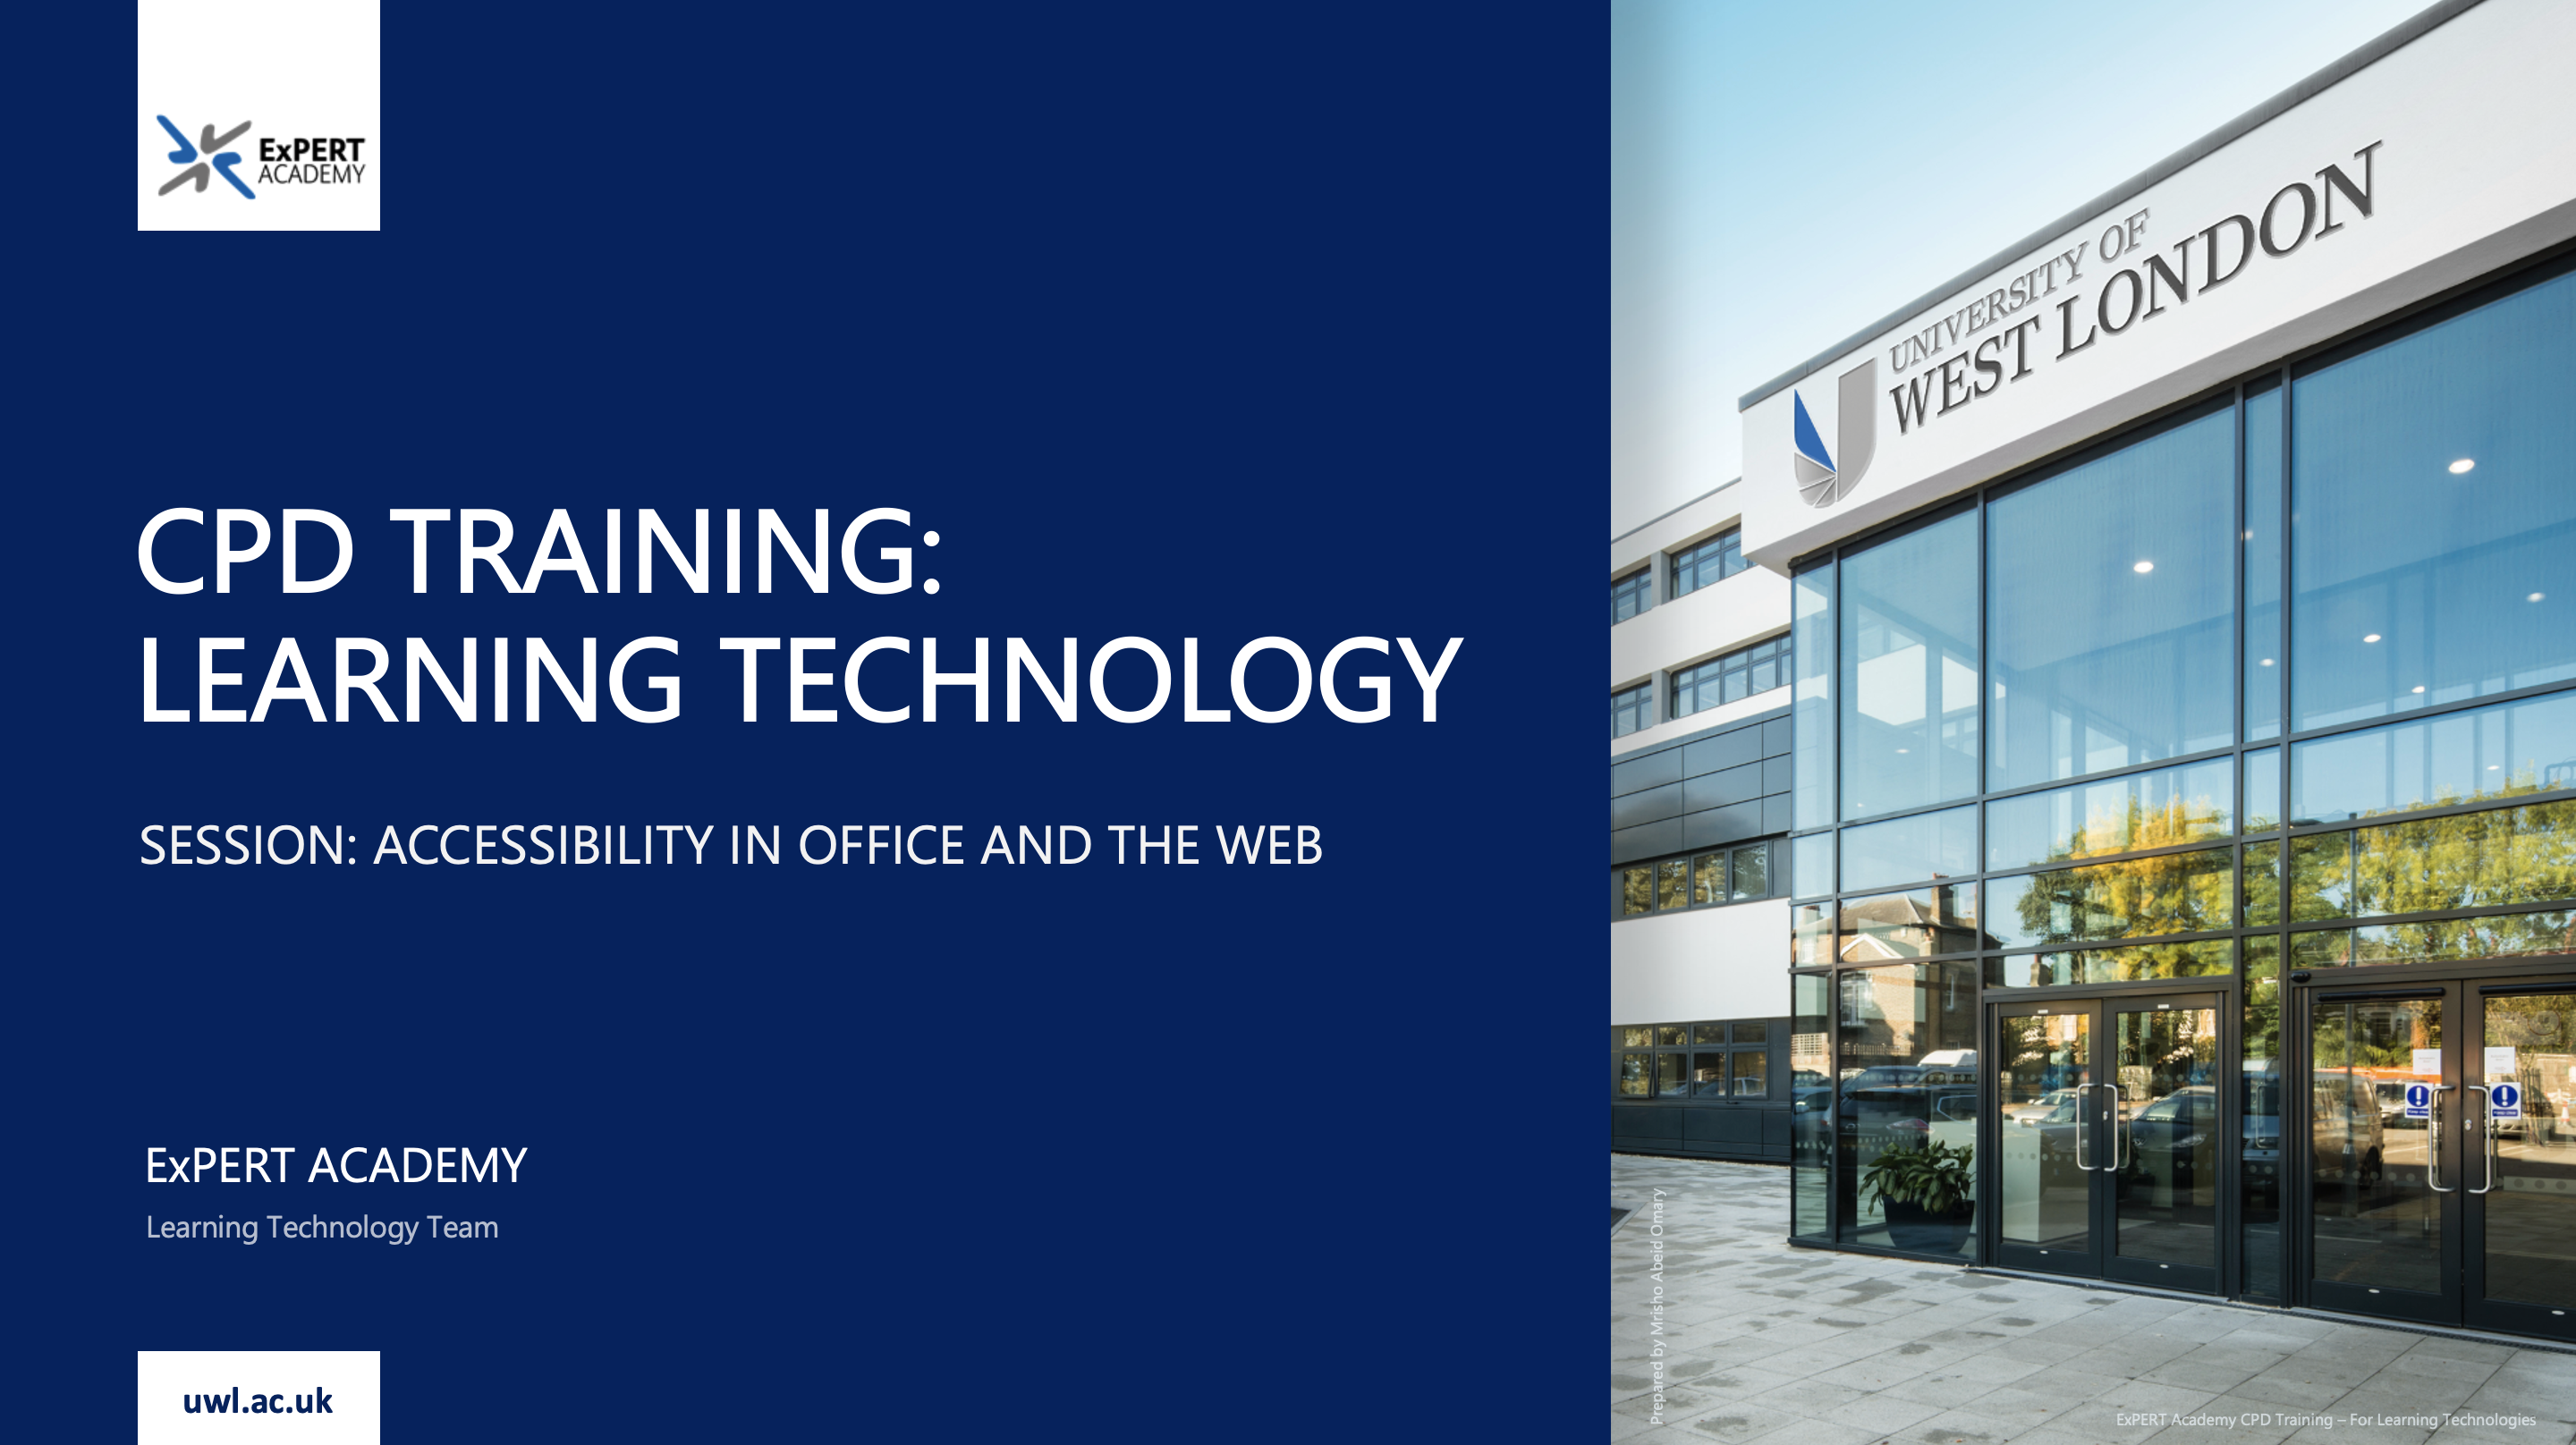 CPD cover image for Accessibility in Office and the Web Training Sessions